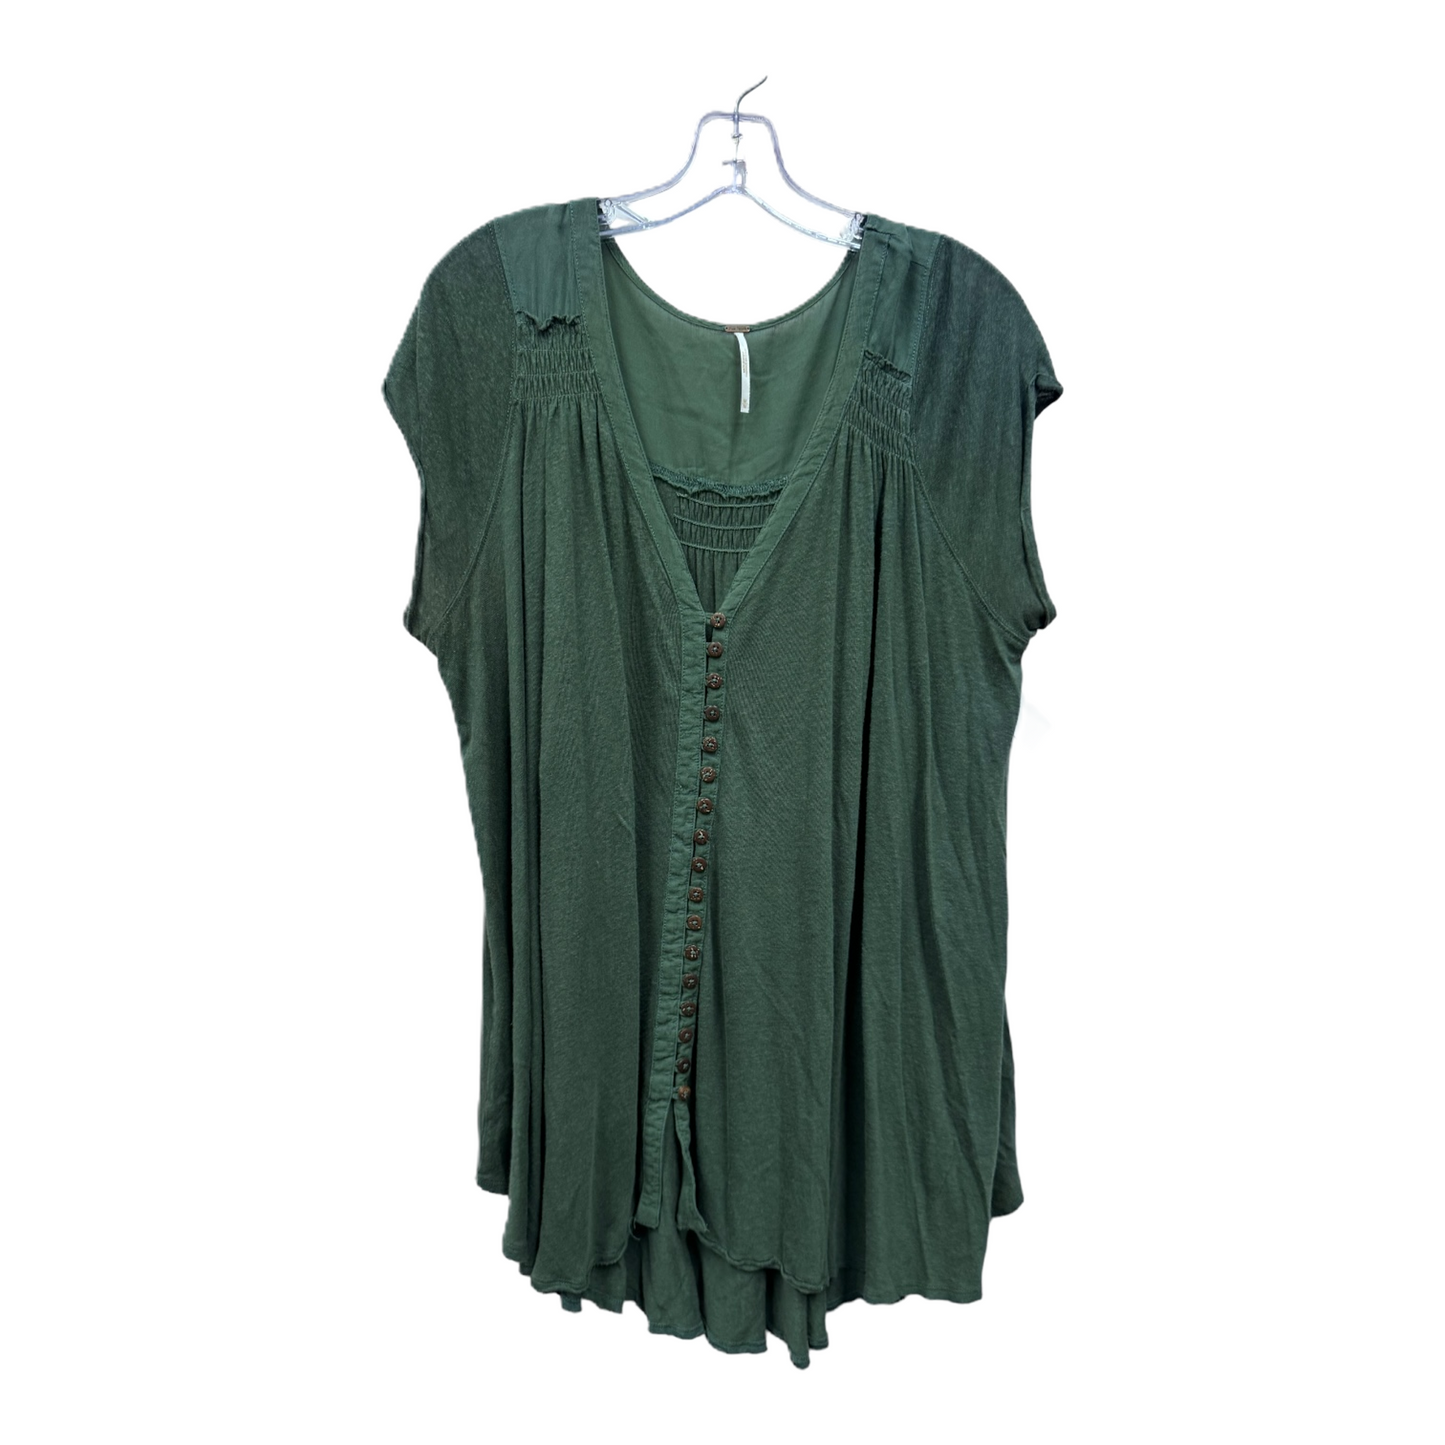 Green Top Short Sleeve By Free People, Size: M